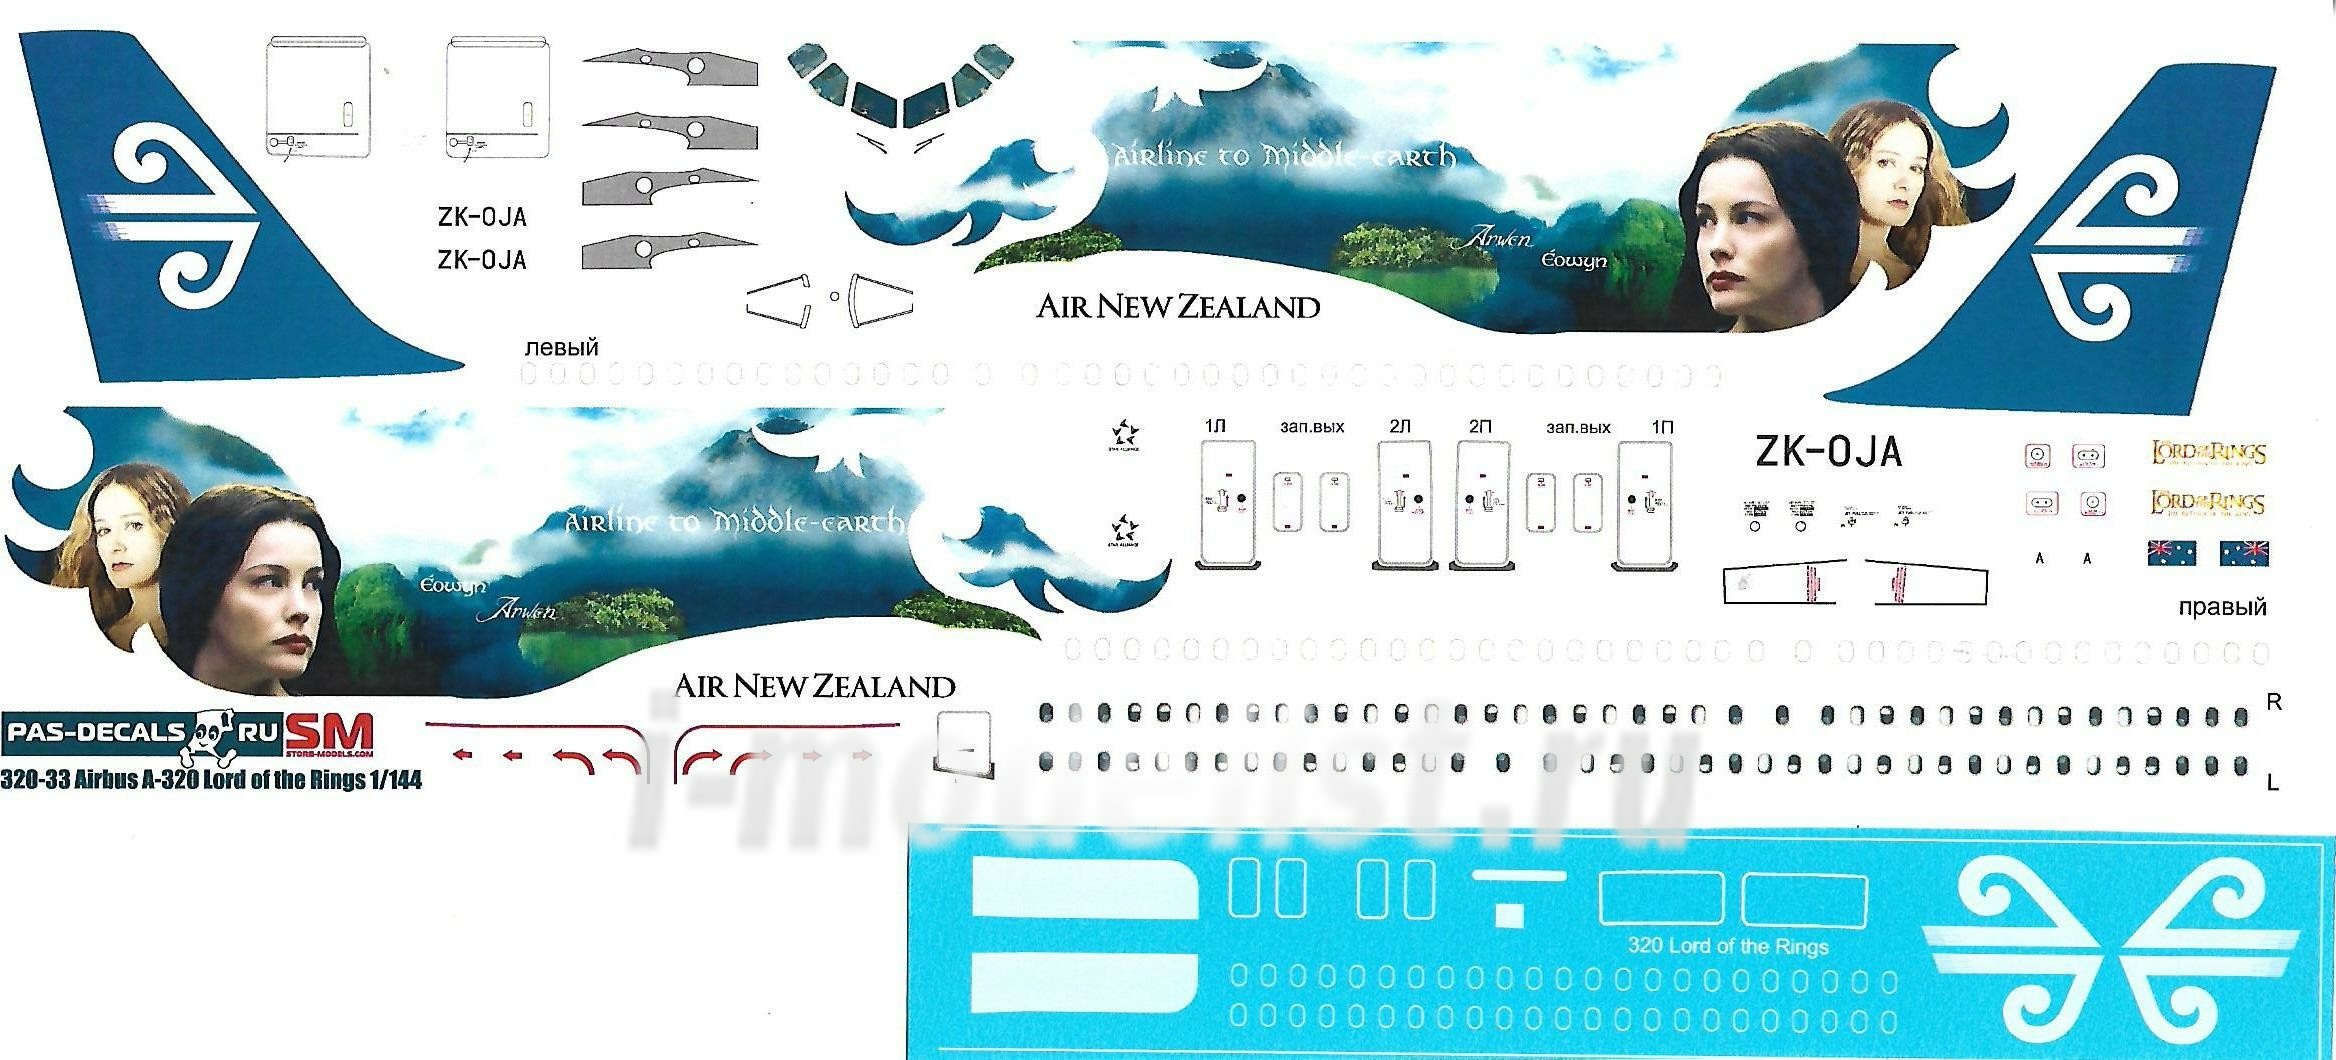 320-33 PasDecals 1/144 Decal on Airbus A320 Air New Zealand Arwen Lord of the Rings